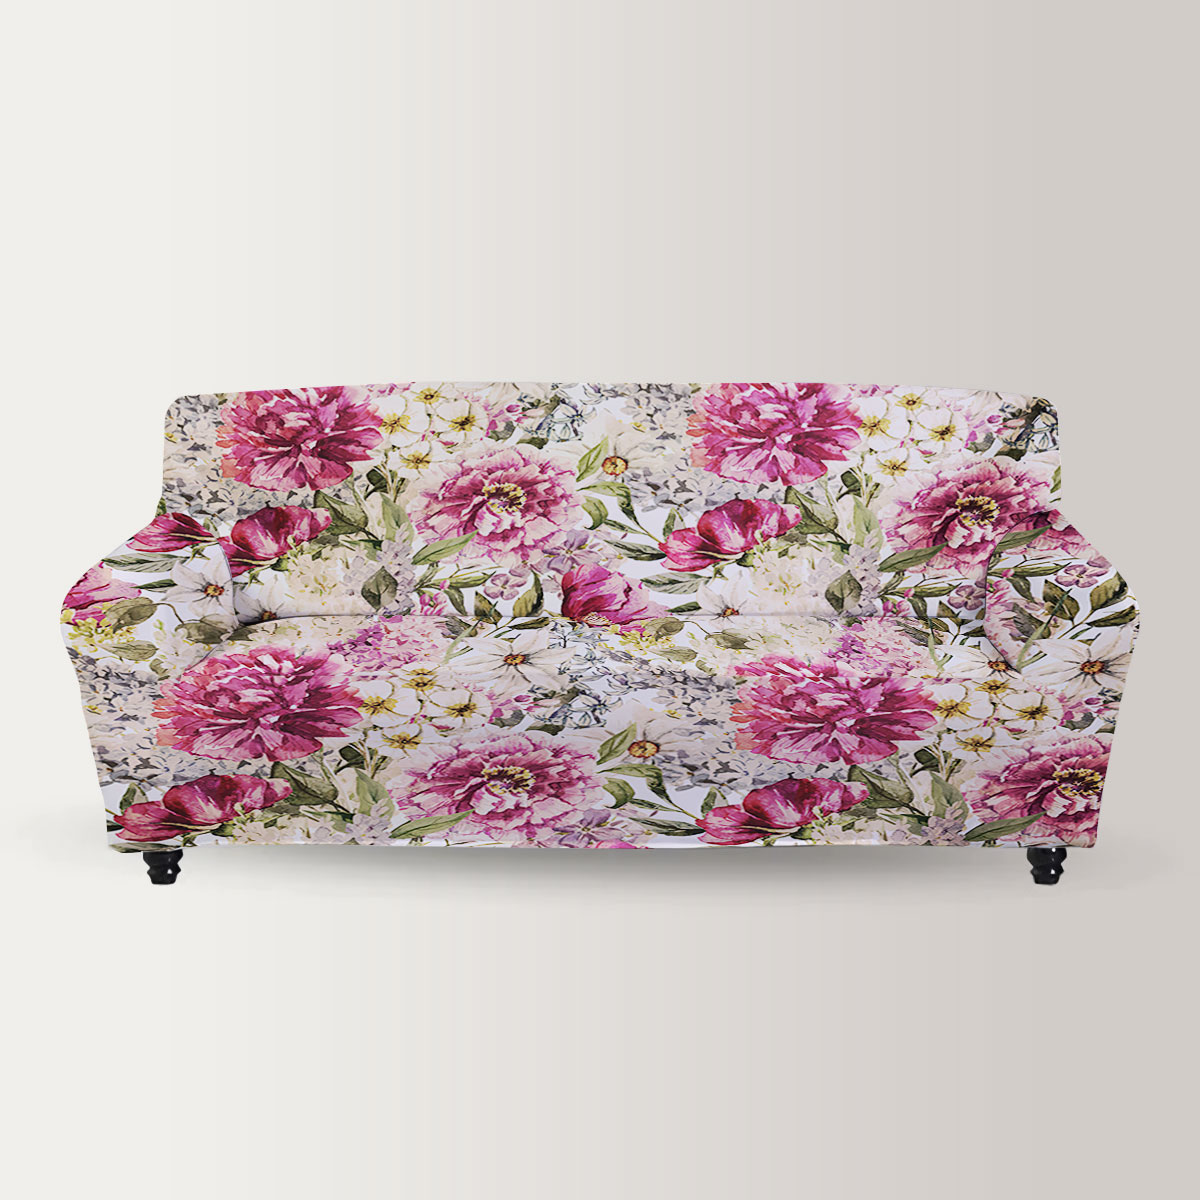 Floral Vintage Peony Sofa Cover_2_1